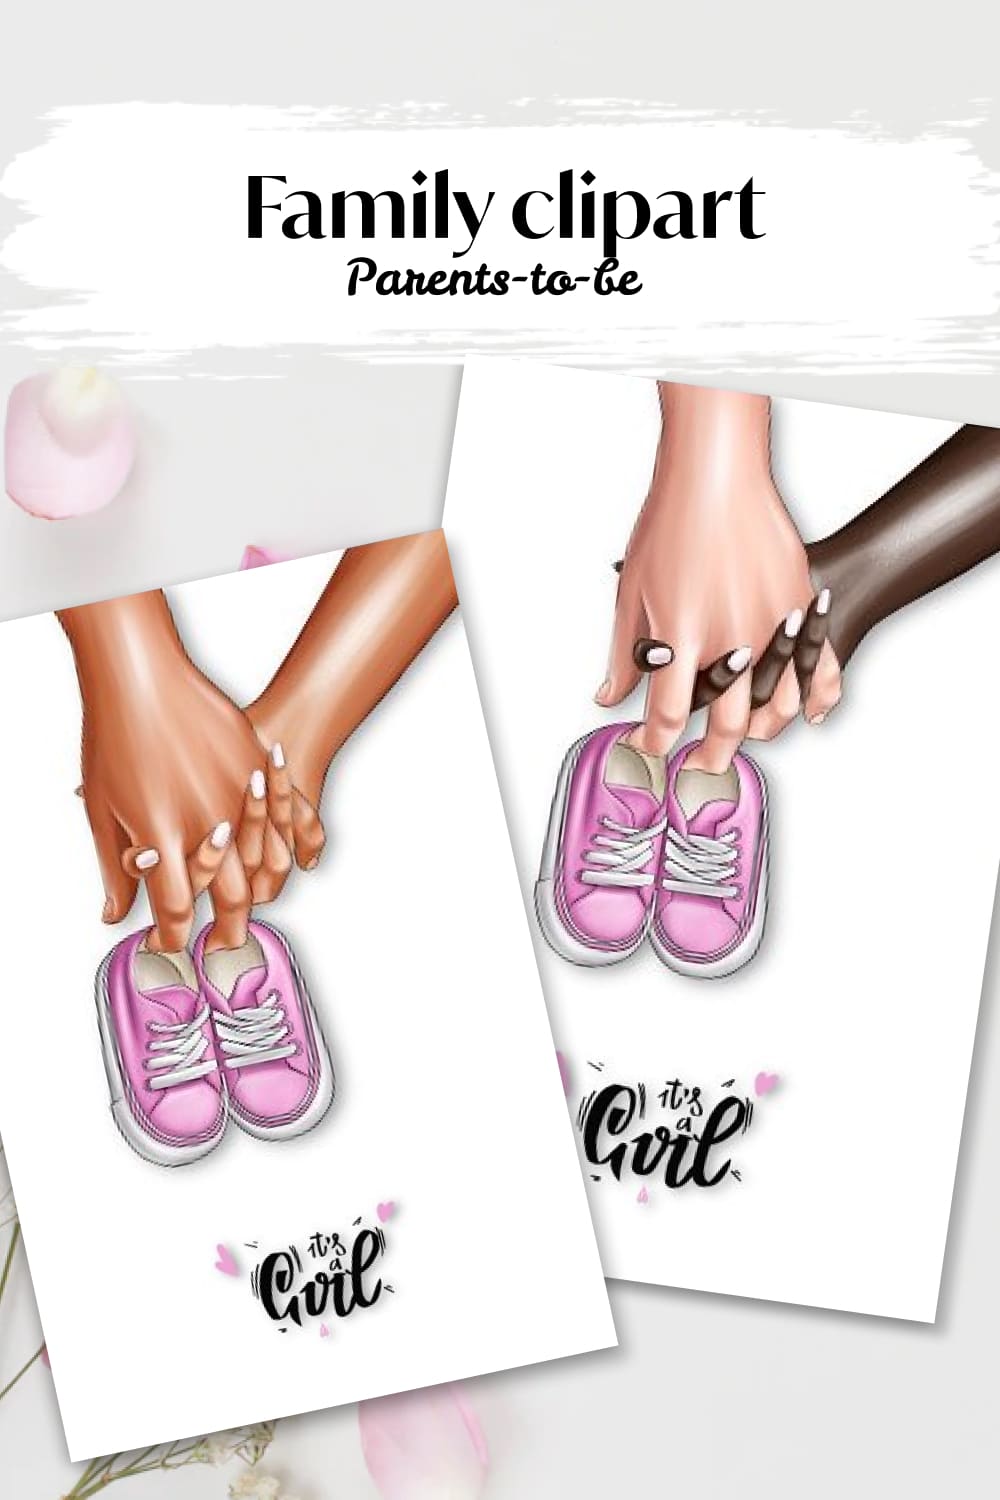 Parents-To-Be Clipart, Family Clipart - Pinterest.